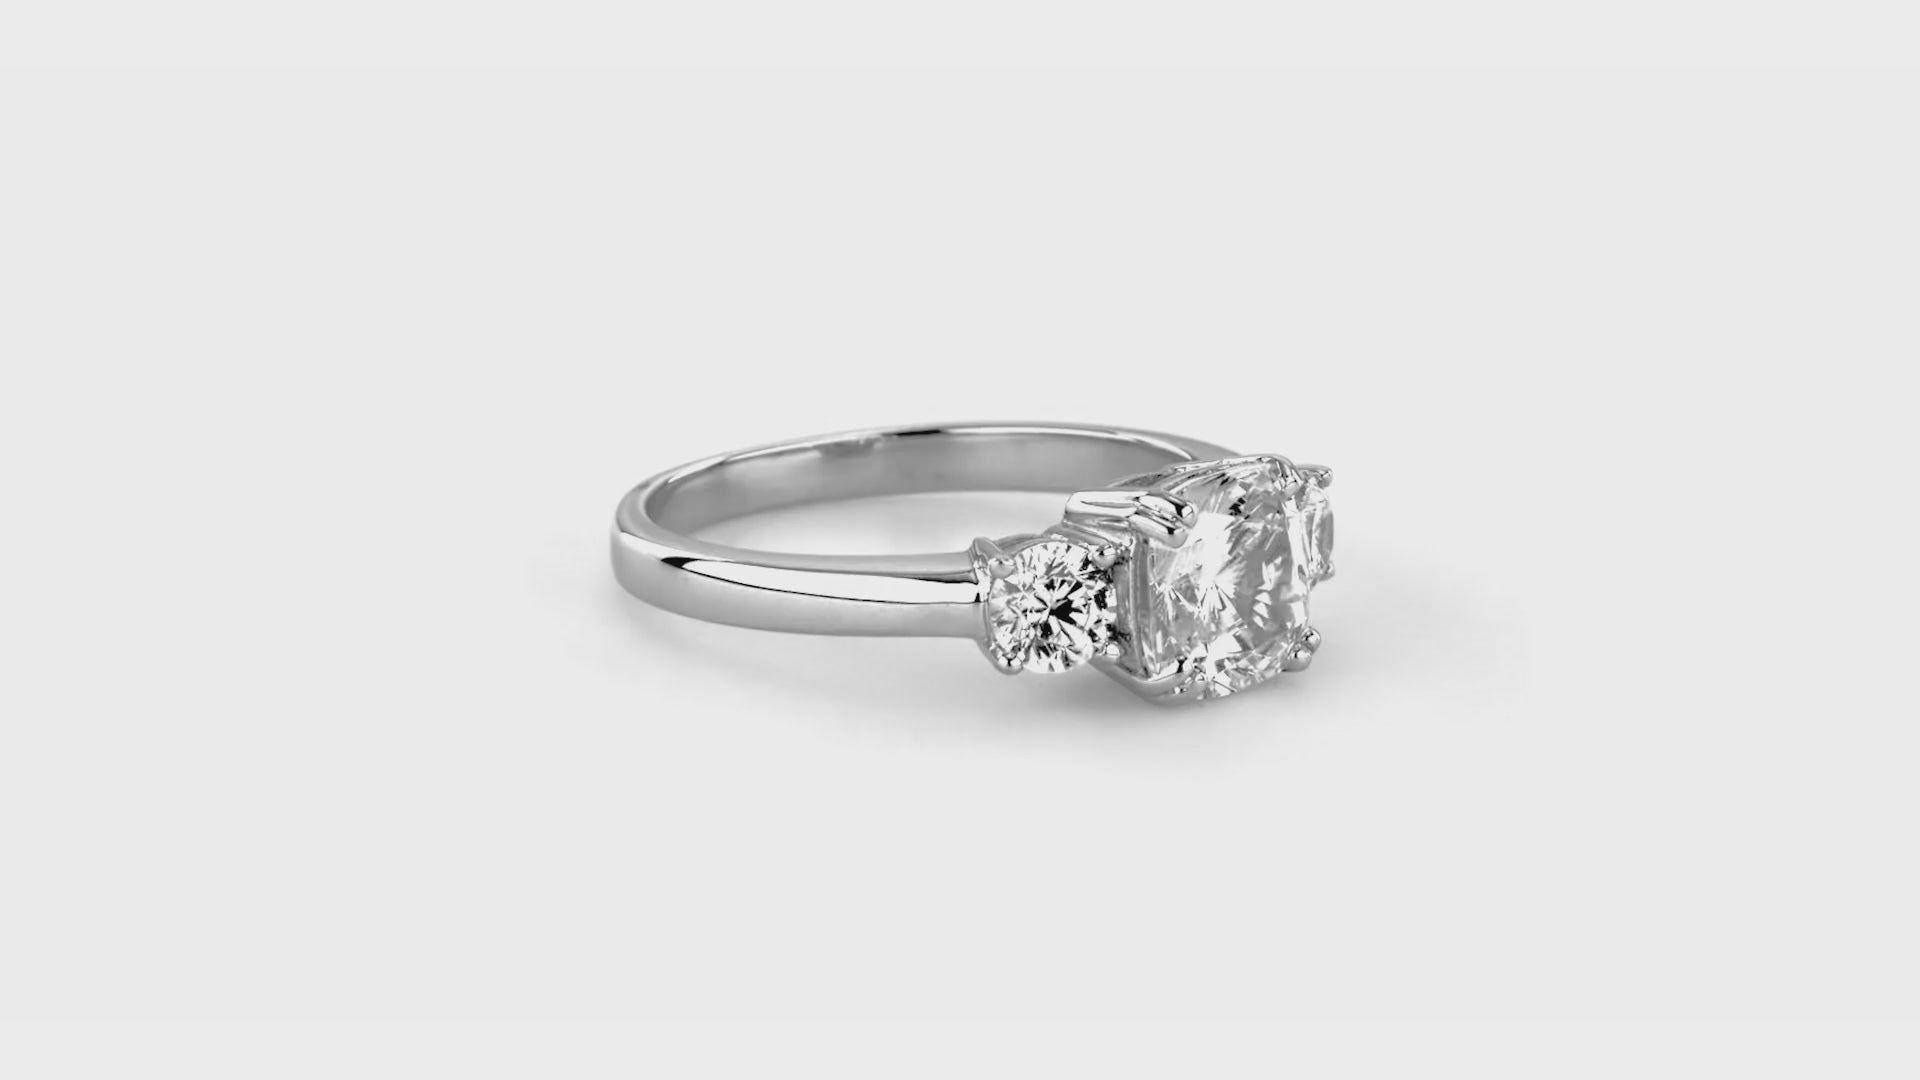 Video Contains 3-Stone 7-Stone Cushion CZ Ring Set in Sterling Silver. Style Number VR450-01